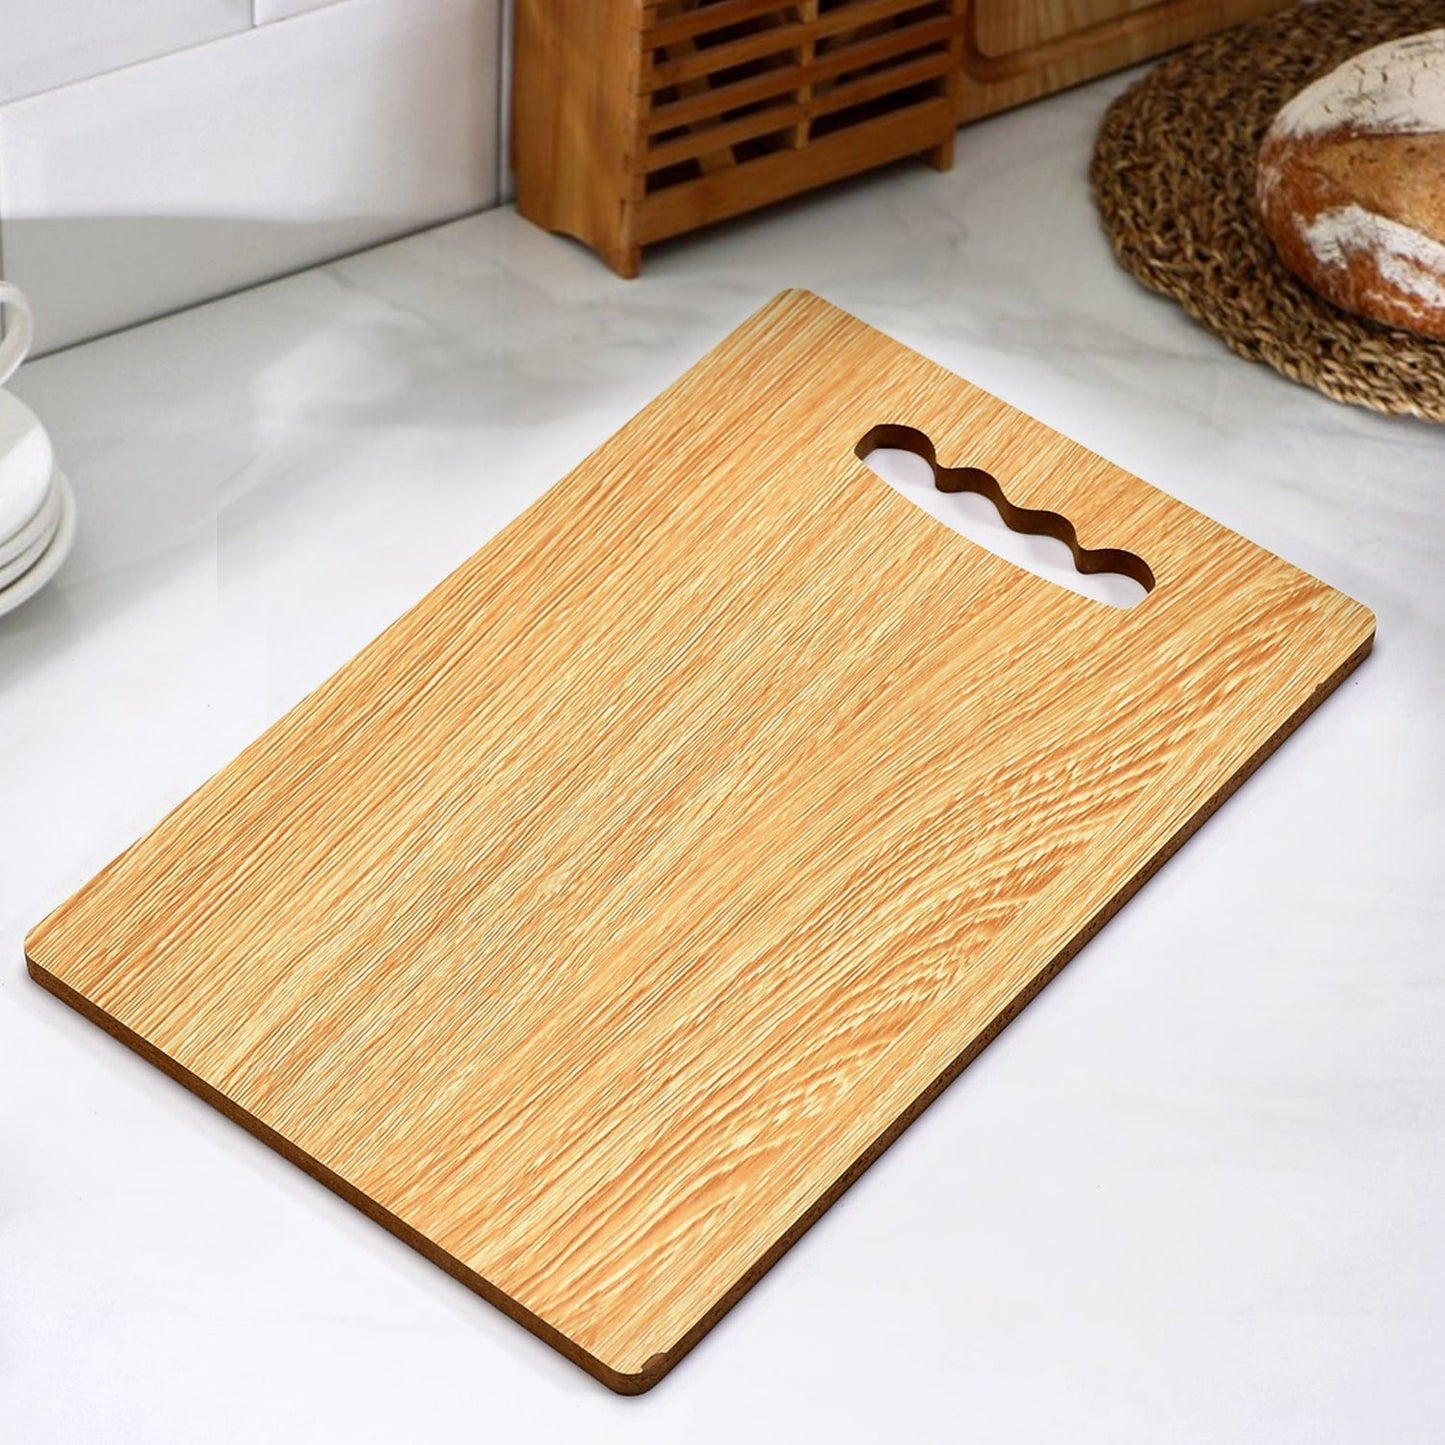 7124 Wooden Chopping Board 26x17 Chopping Vegetable & fruits For Home & Kitchen Use DeoDap